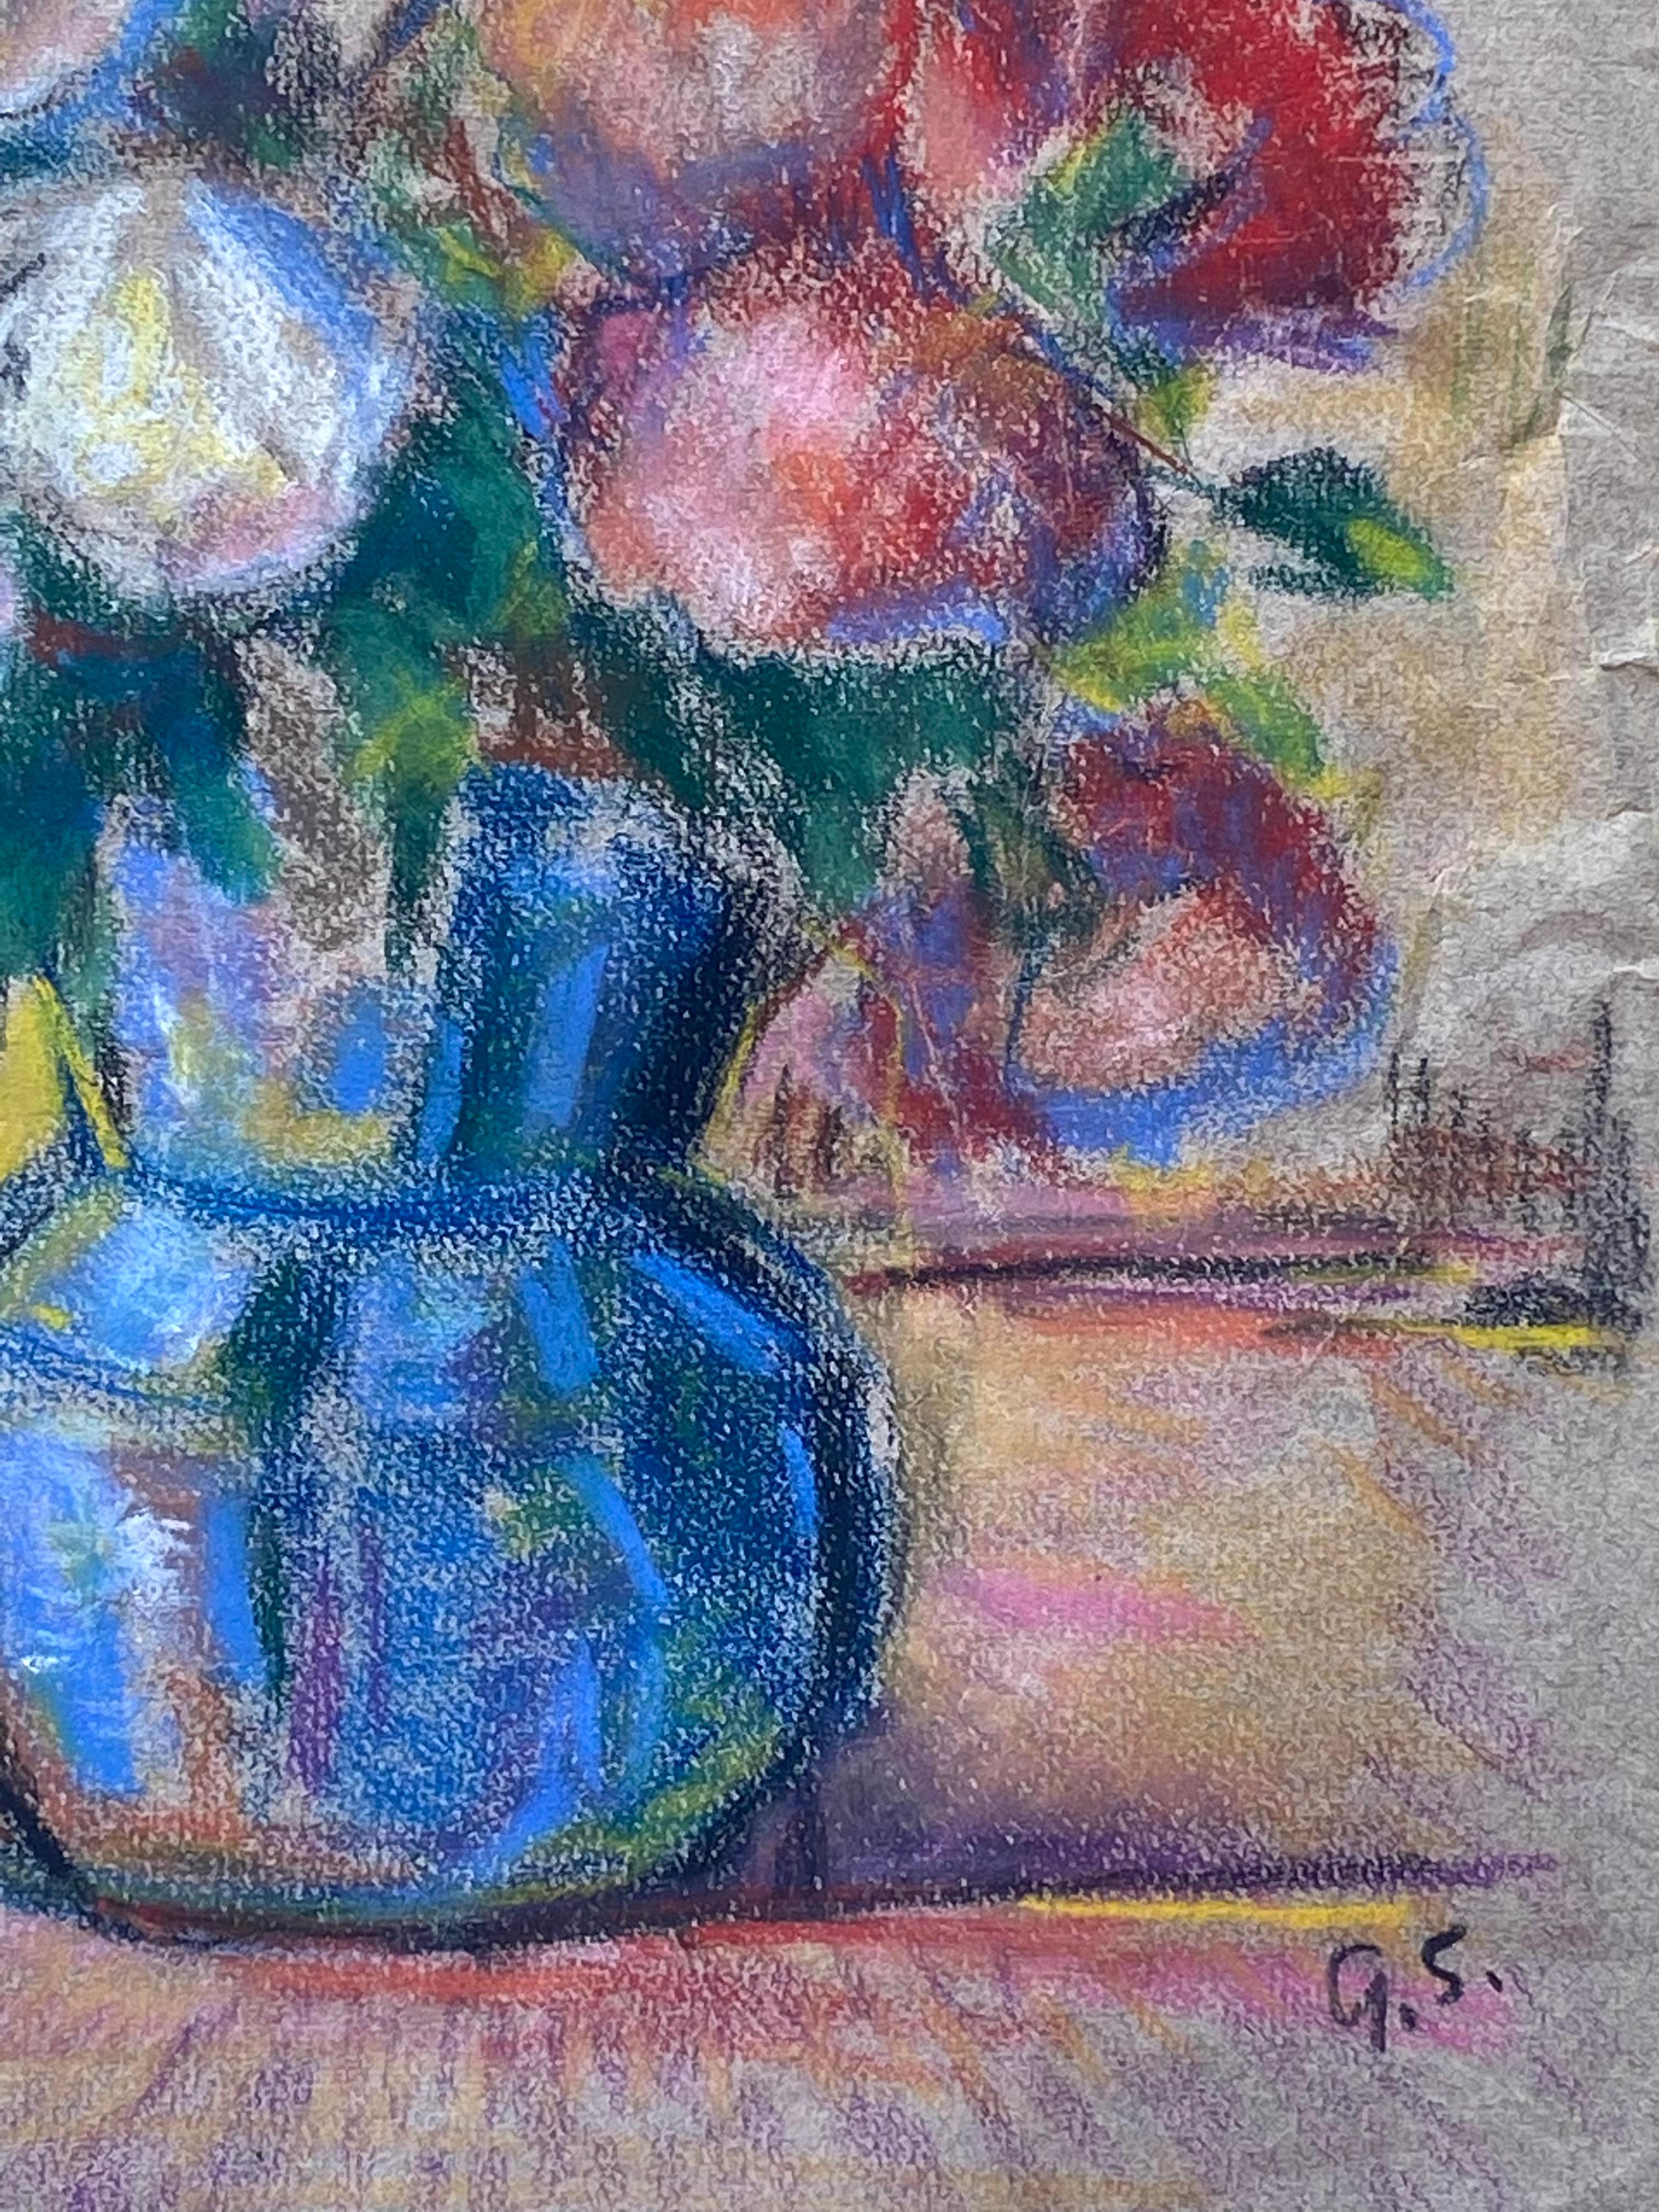 Here for your consideration is an original oil pastel on archival paper of a floral bouquet in a blue vase by the well known French artist, Gaston Sebire.  Signed with the artist’s initials lower right. Condition is good to very good.  The artwork